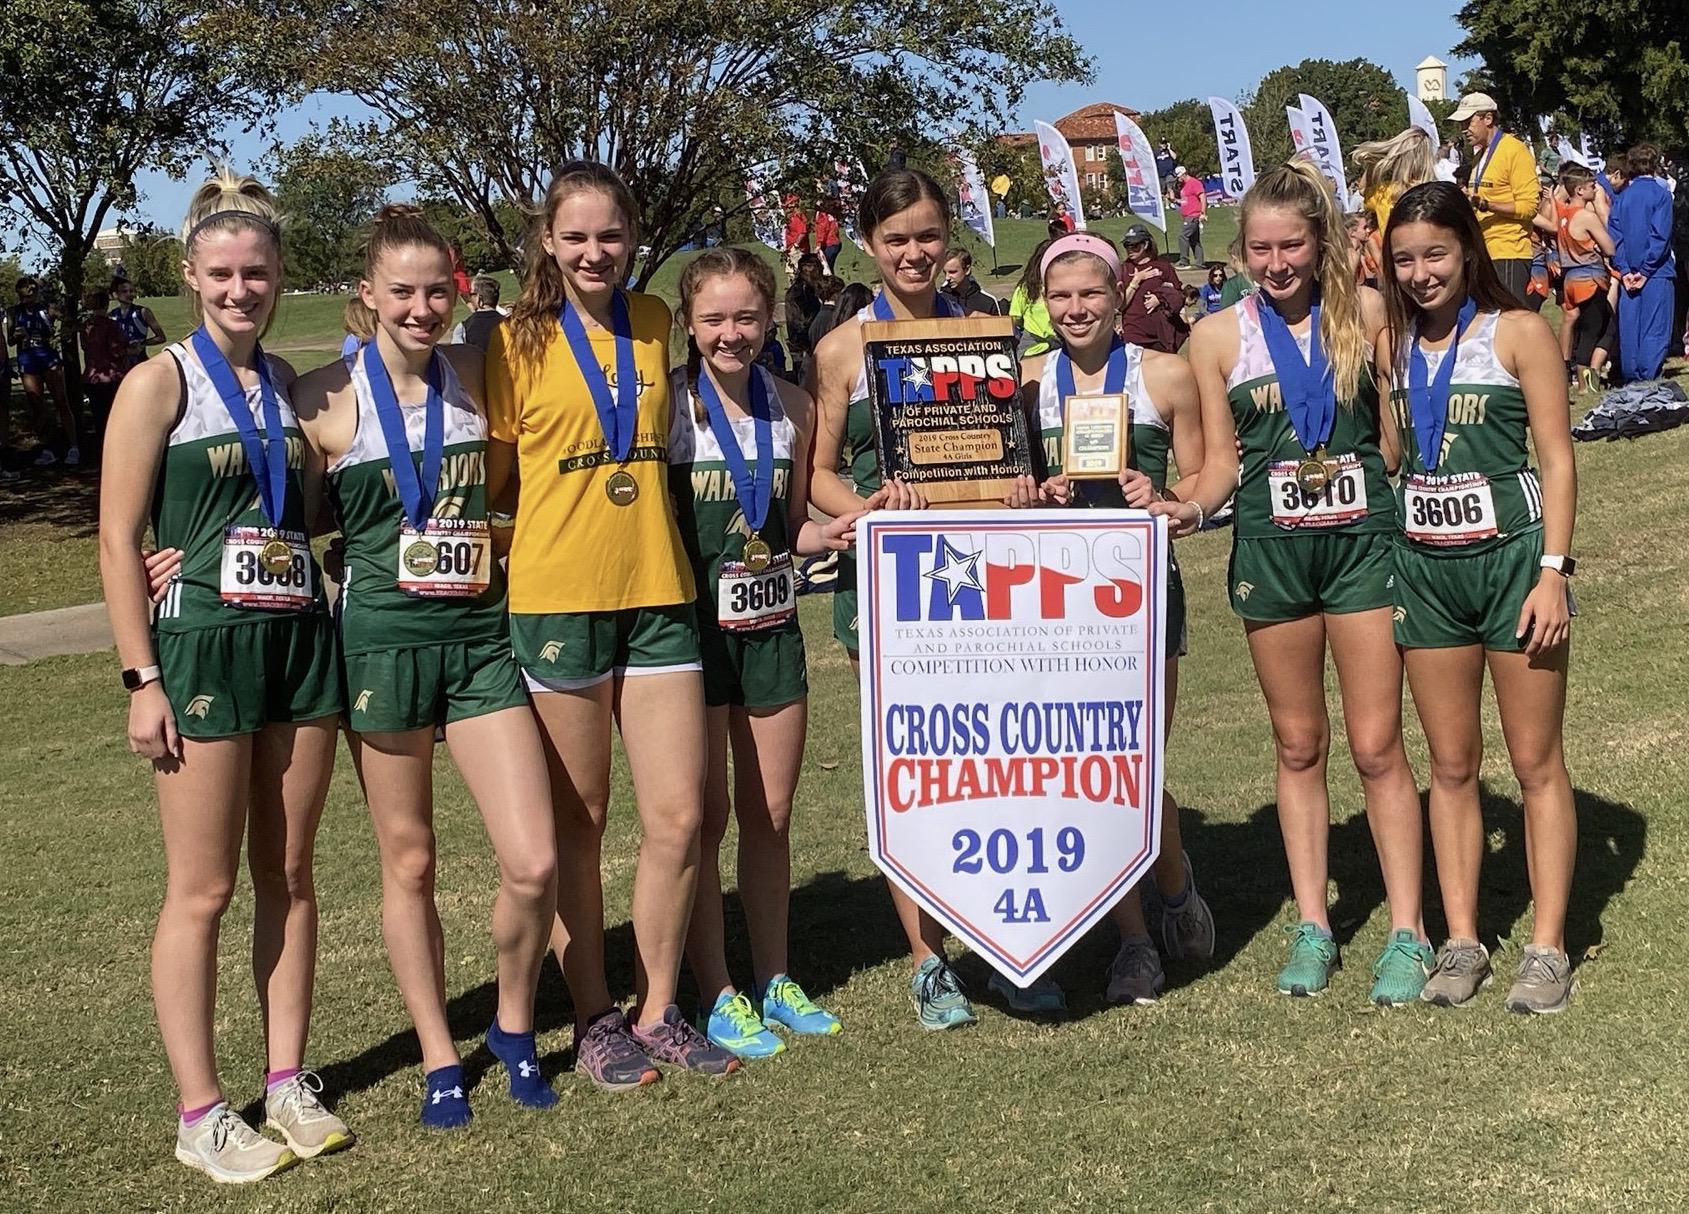 CROSS COUNTRY TWCA leads the way at TAPPS state meet